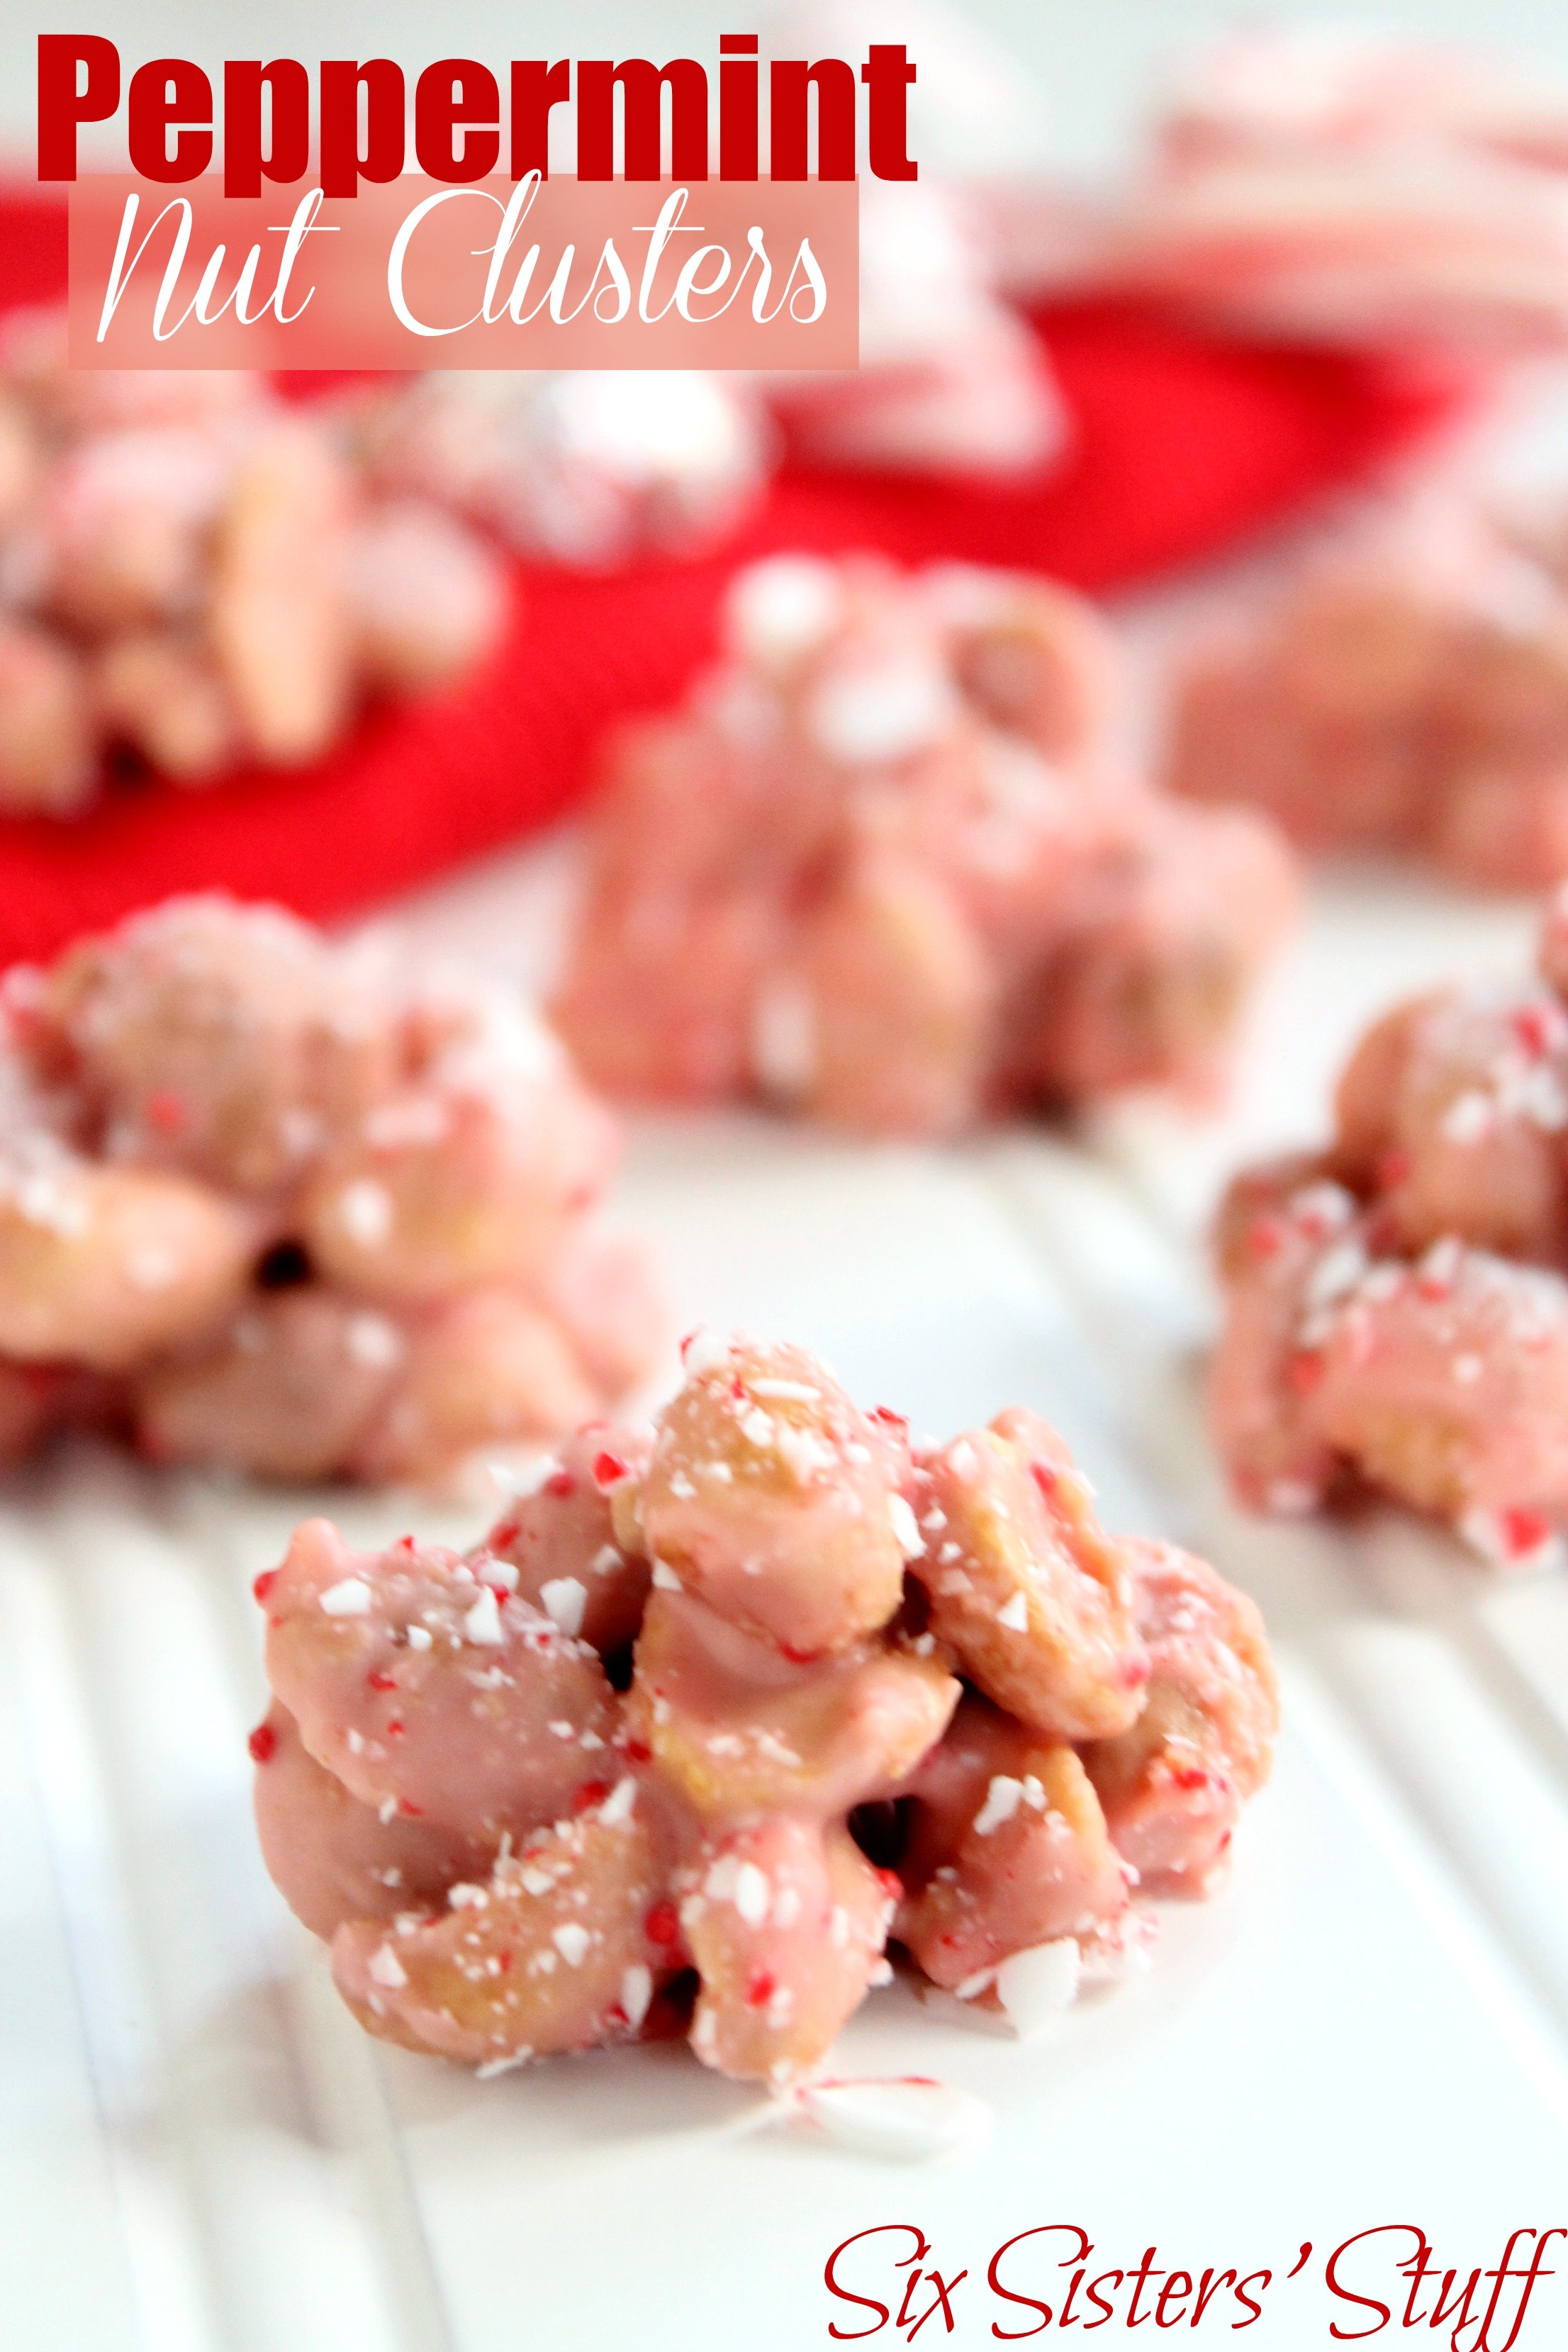 Peppermint Nut Clusters